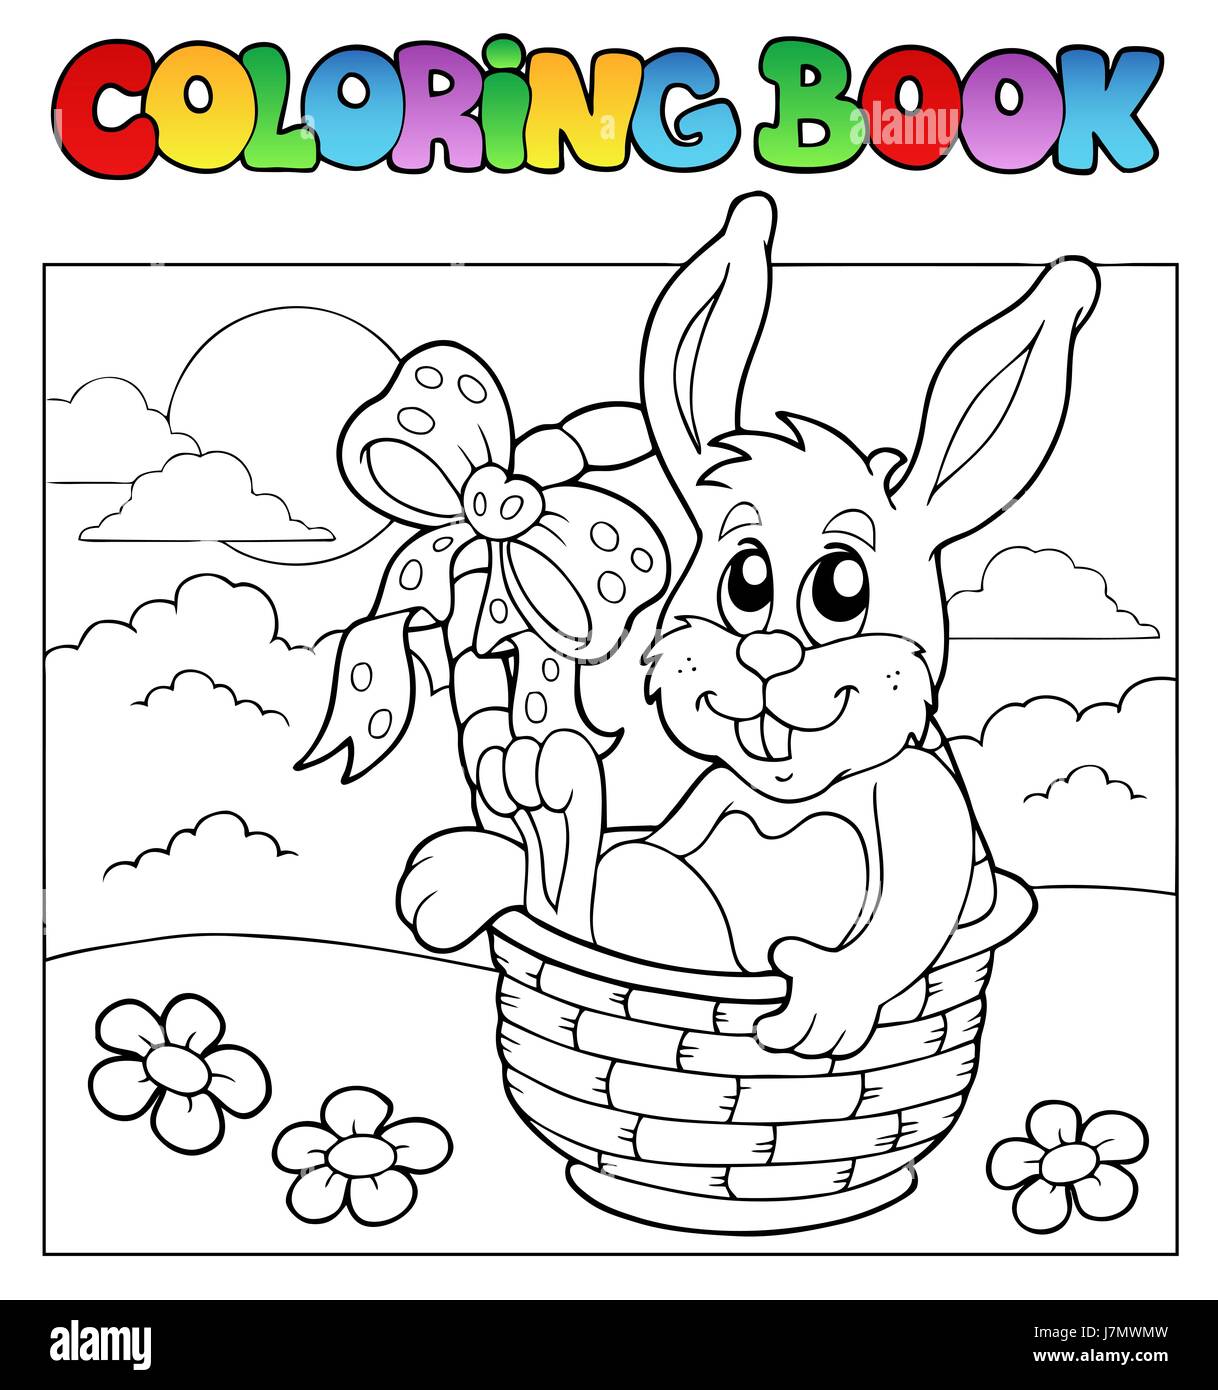 colour easter rabbit paint bunny bunnies painted colouring book art holiday Stock Photo